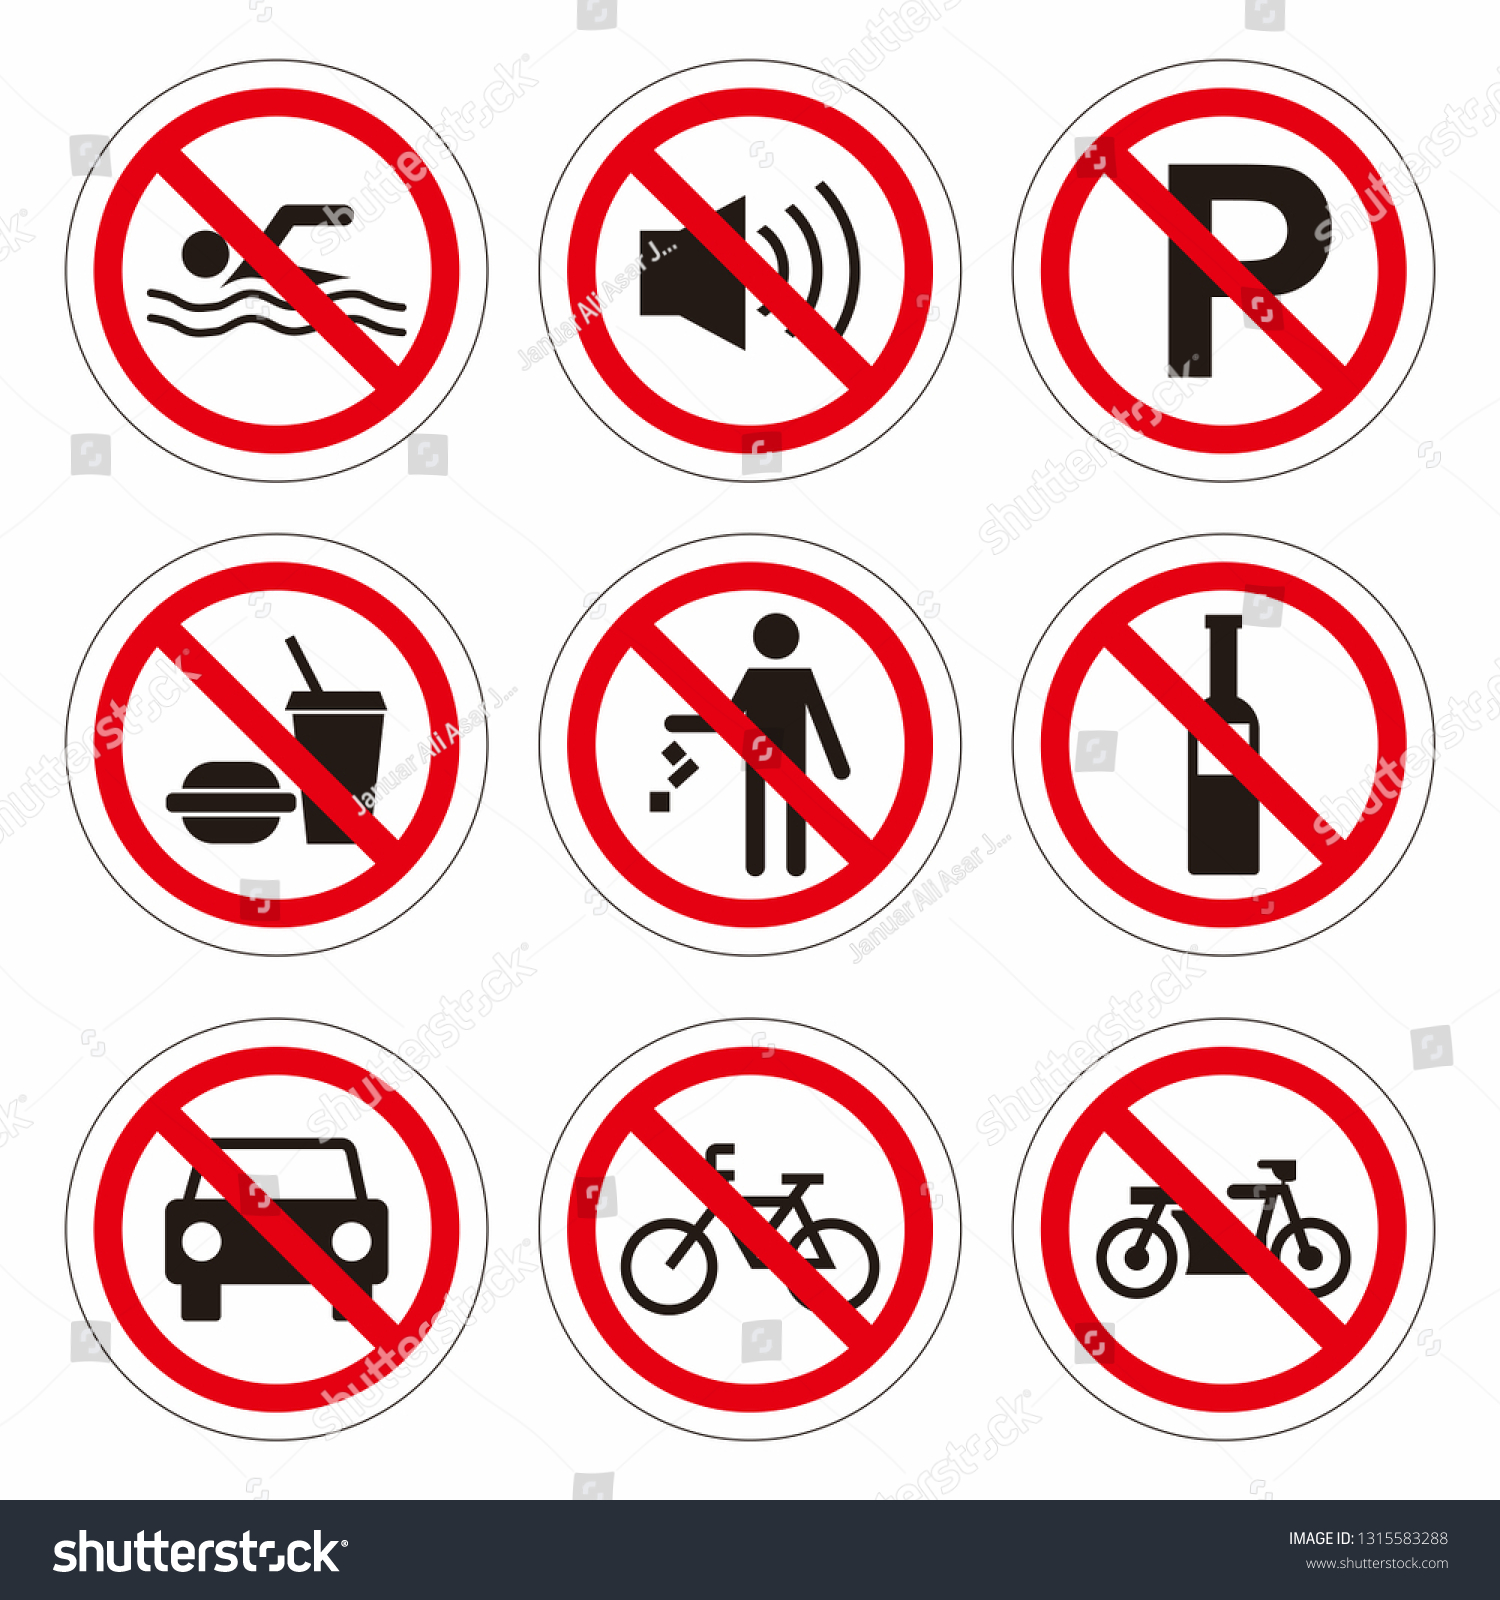 Street signs vector, Icon Signs - vector #1315583288